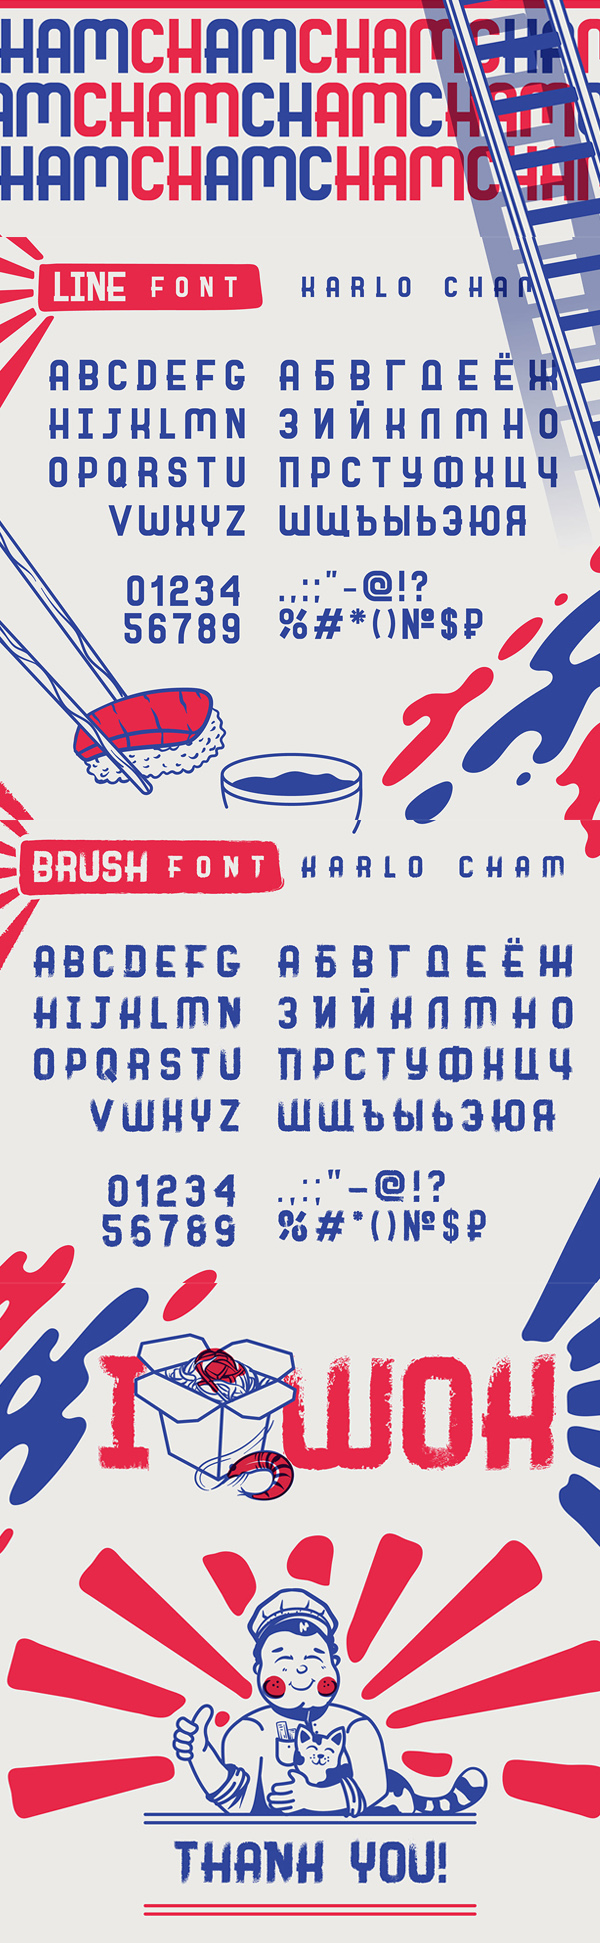 Karlo Cham Font Letters